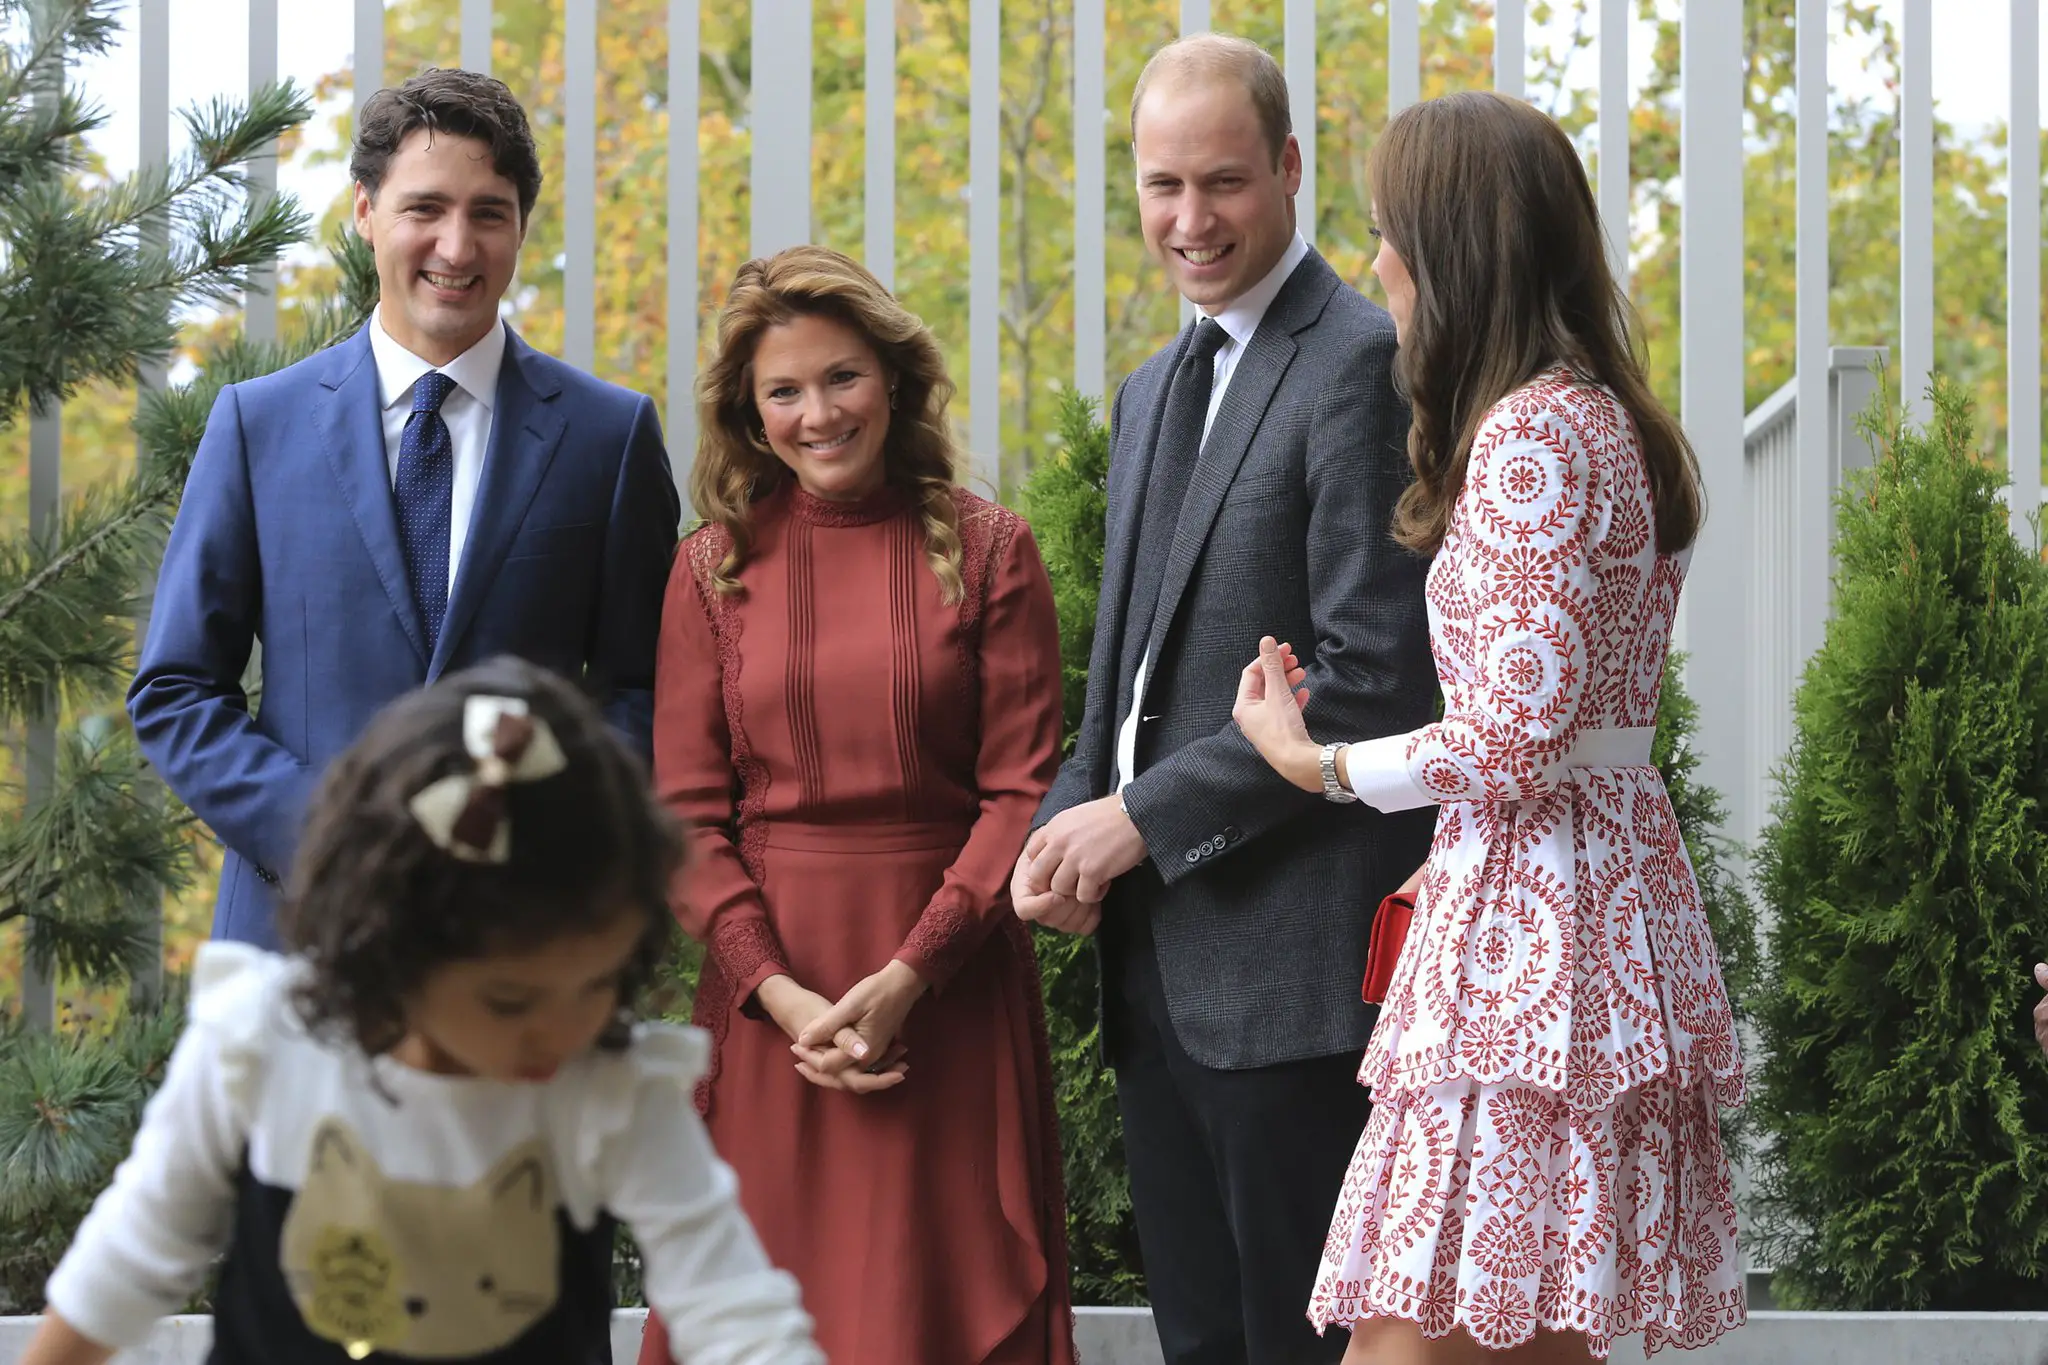 The Duke and Duchess of Cambridge with Justin trudeau and sophie trudeau in Canada